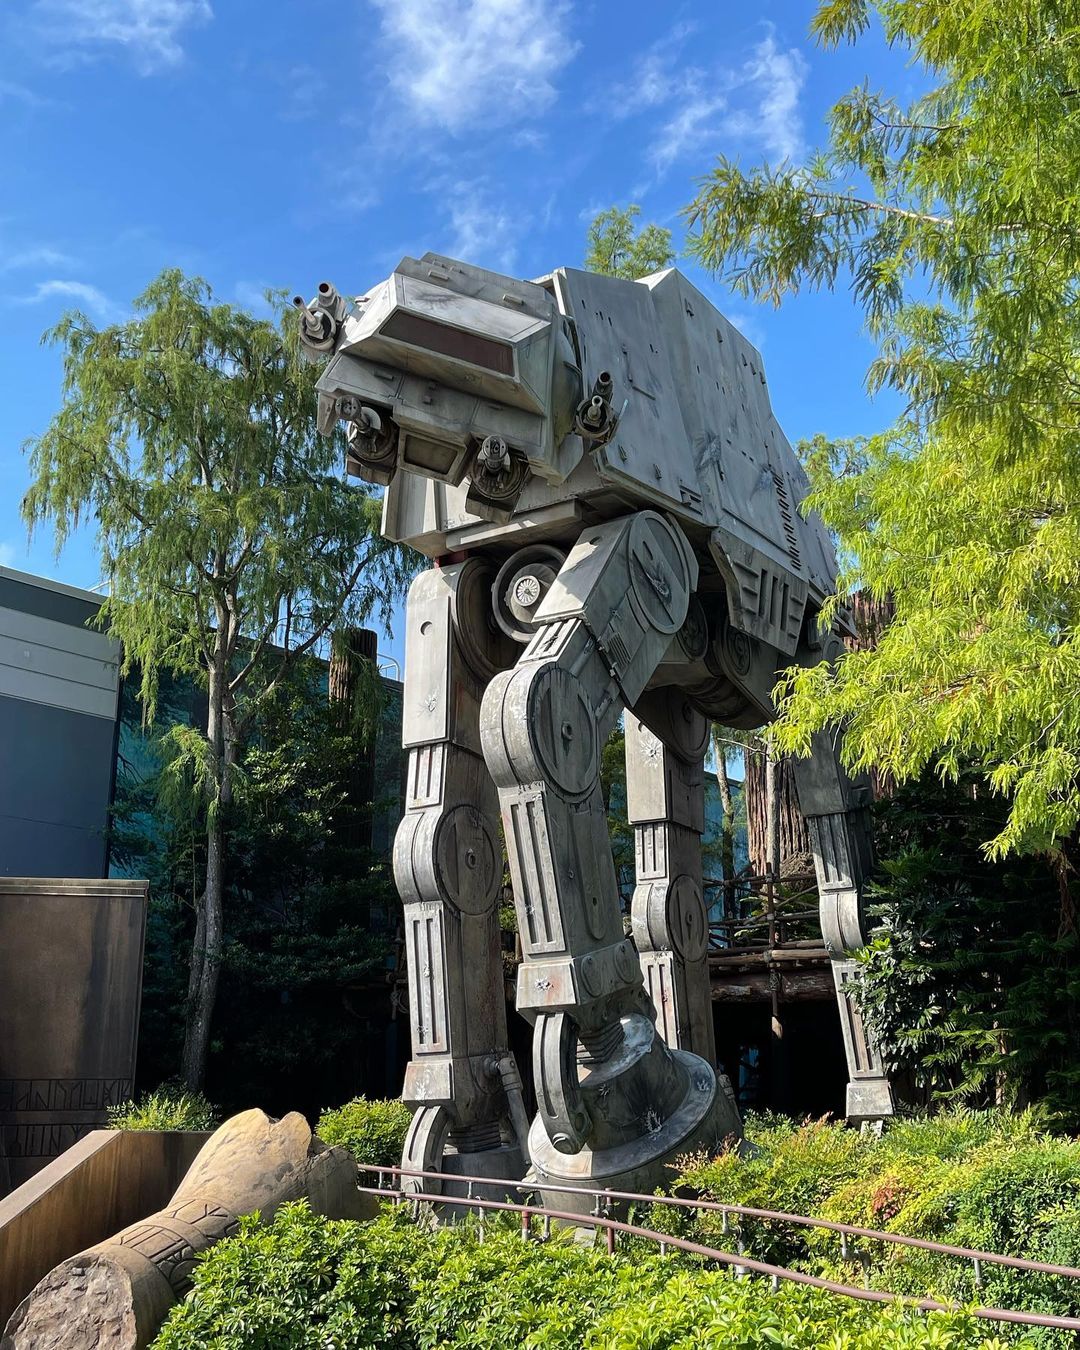 Star Tours The Adventures Continue - Hollywood Studios Attraction (1)